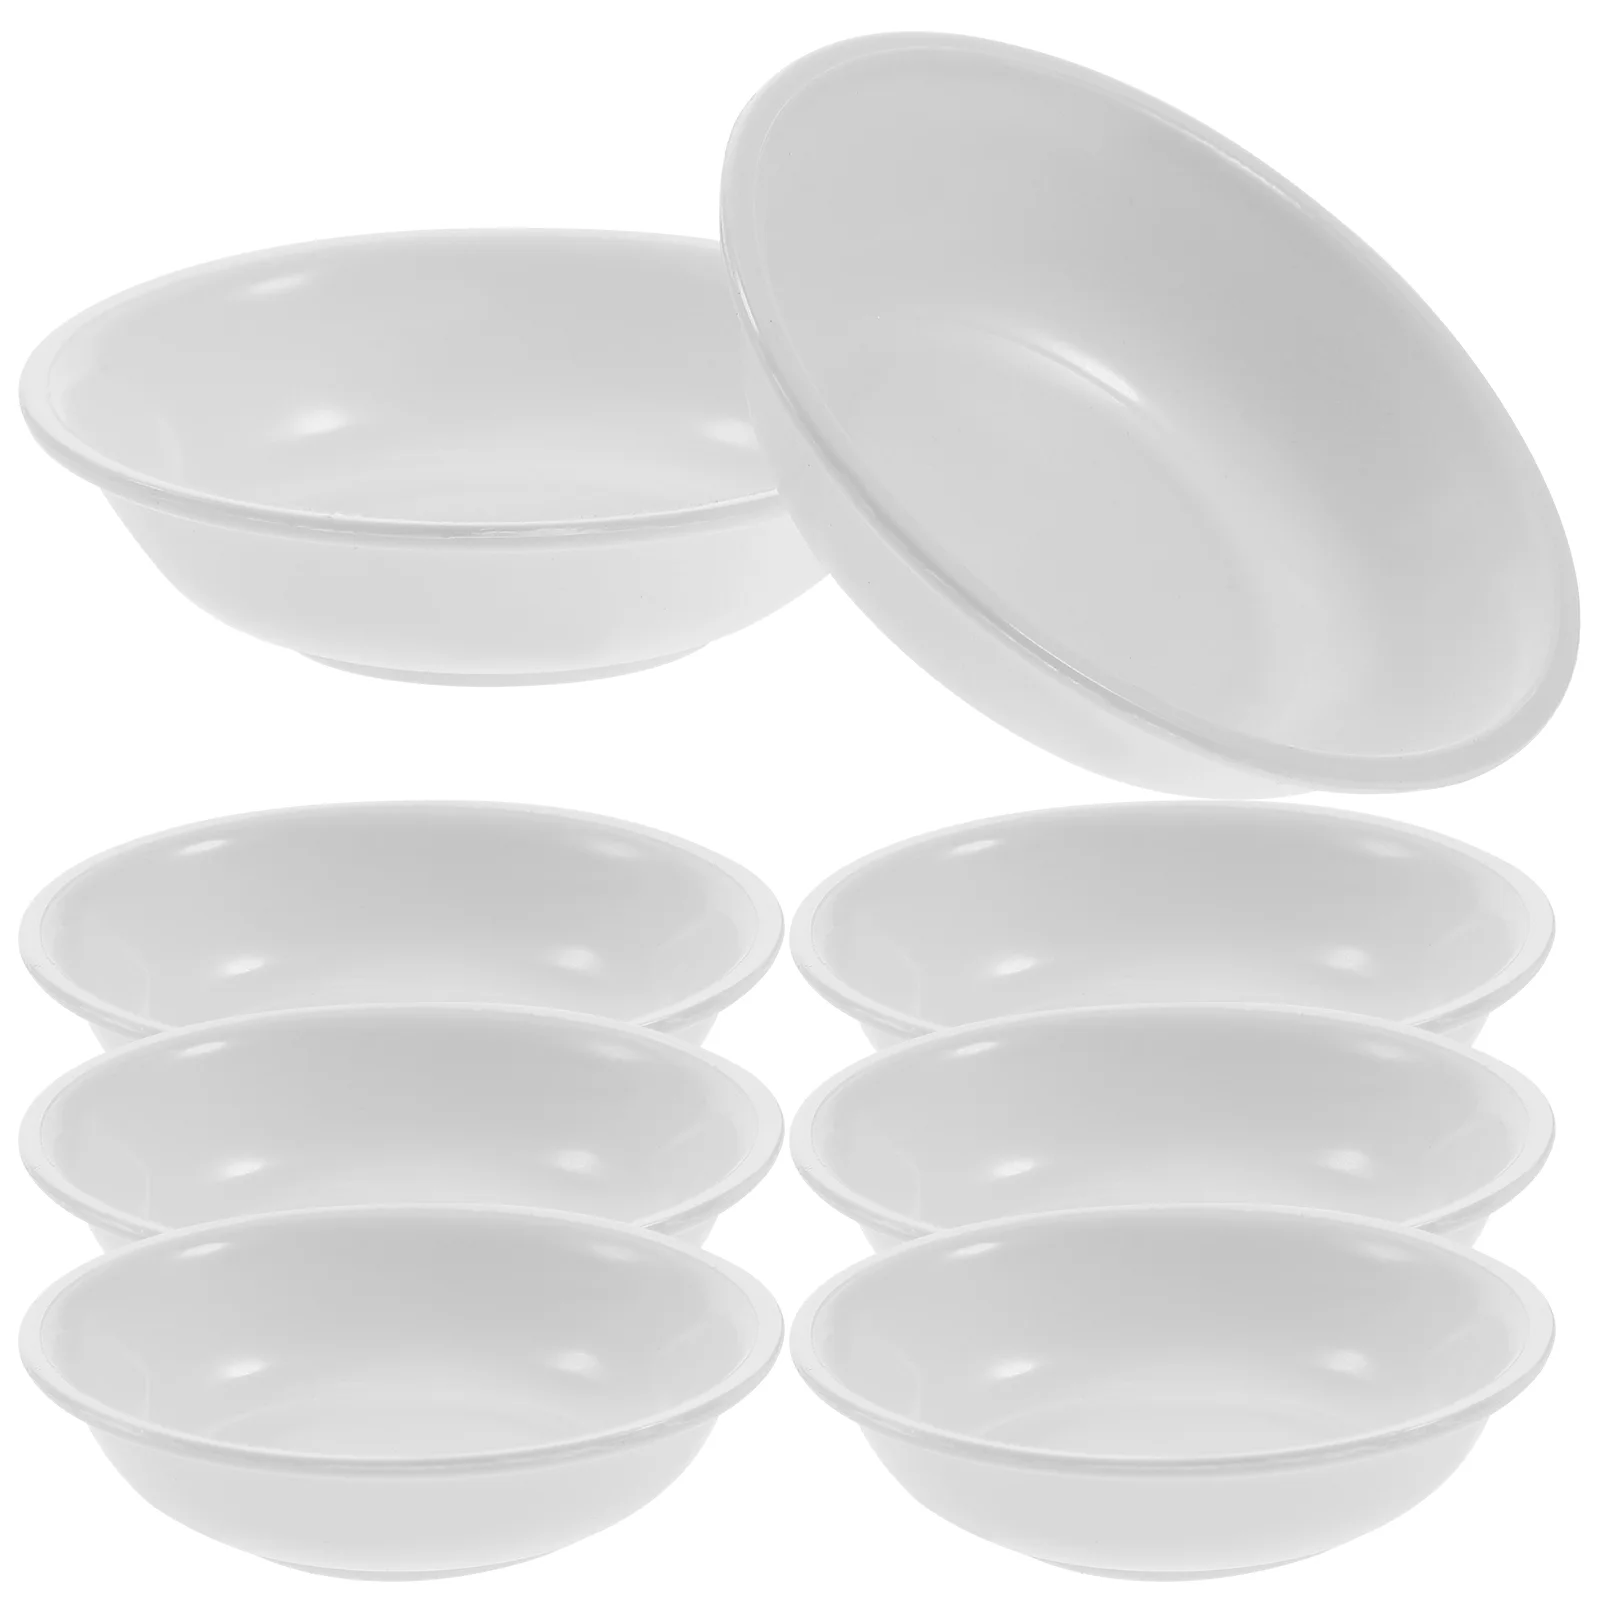 

Sauce Dipping Dish Dishes Bowls Plate Bowl Seasoning Condiment Soy Plates Appetizer Tray Serving Cups Plastic Side Sushi Mini